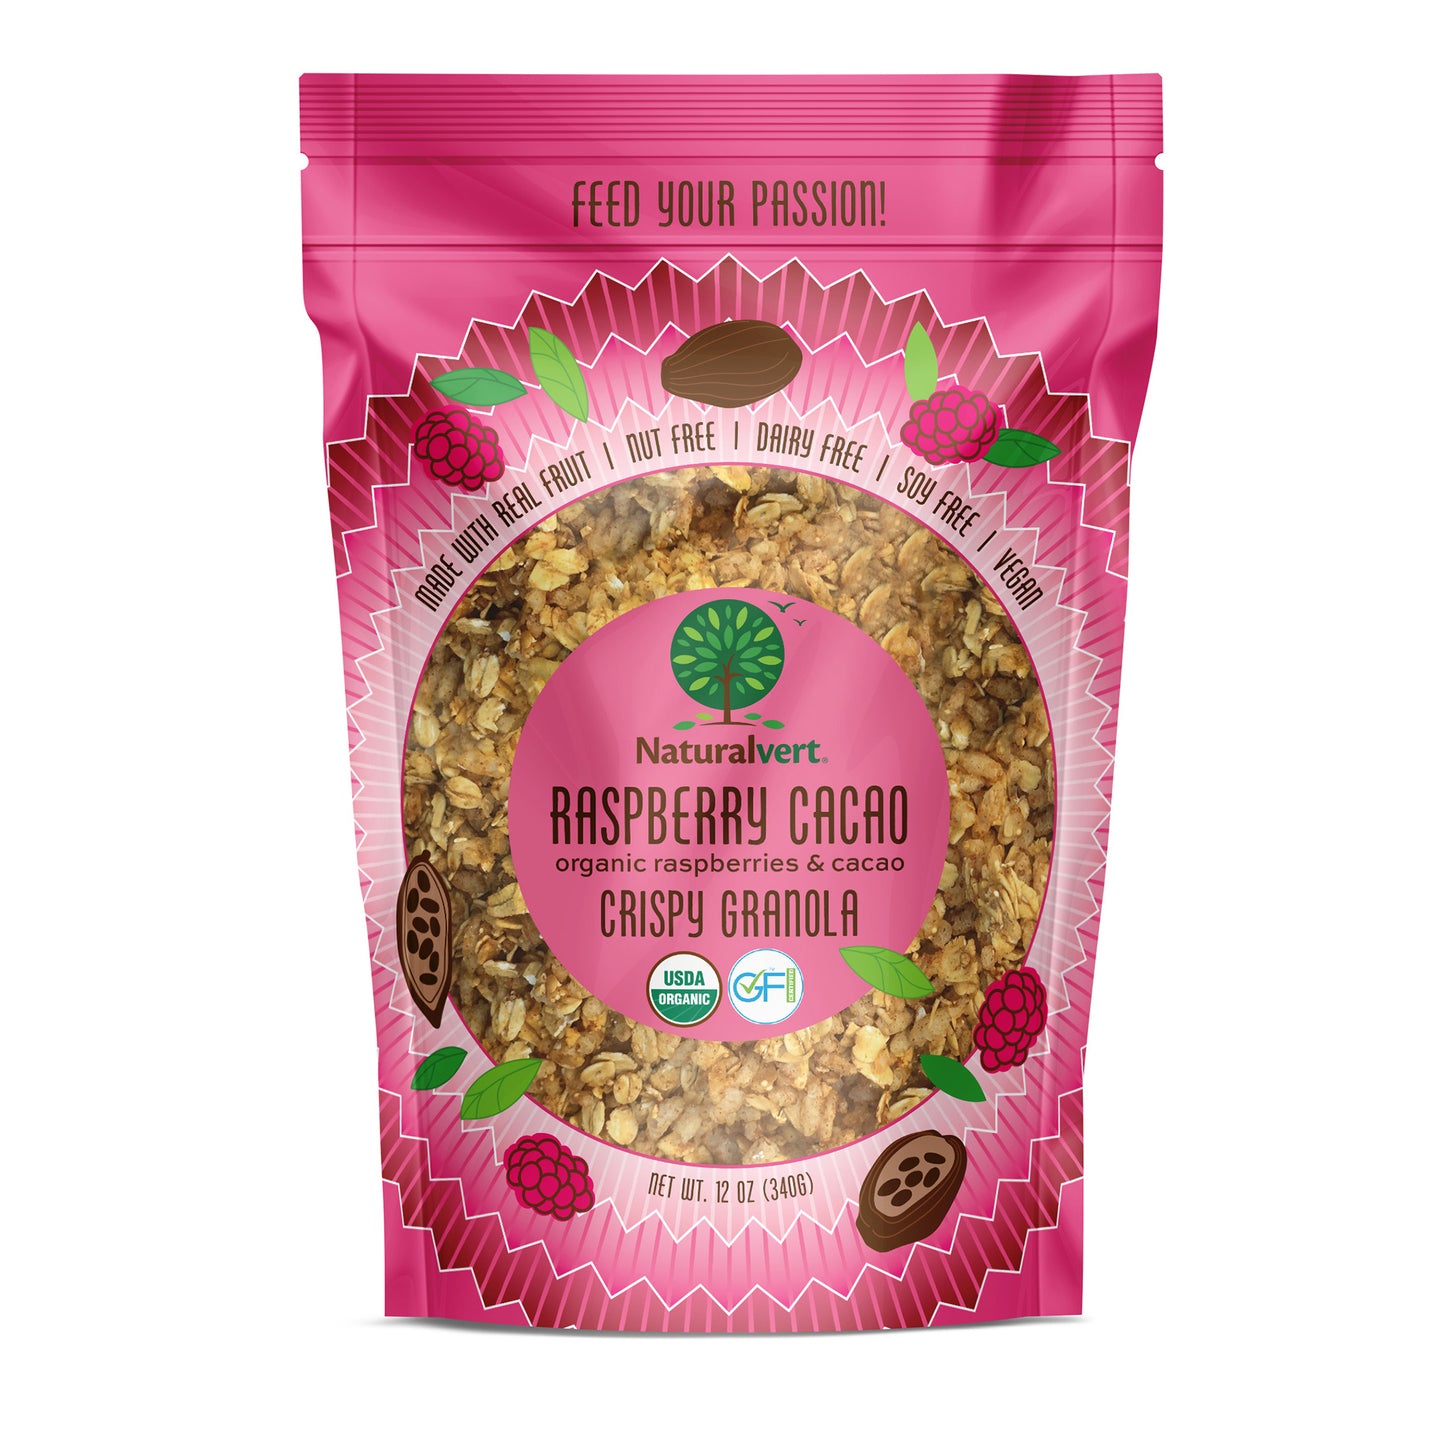 Organic, Gluten-free, vegan granola. made with real fruit. Nut free, soy free, dairy free. Raspberry Cacao flavor.